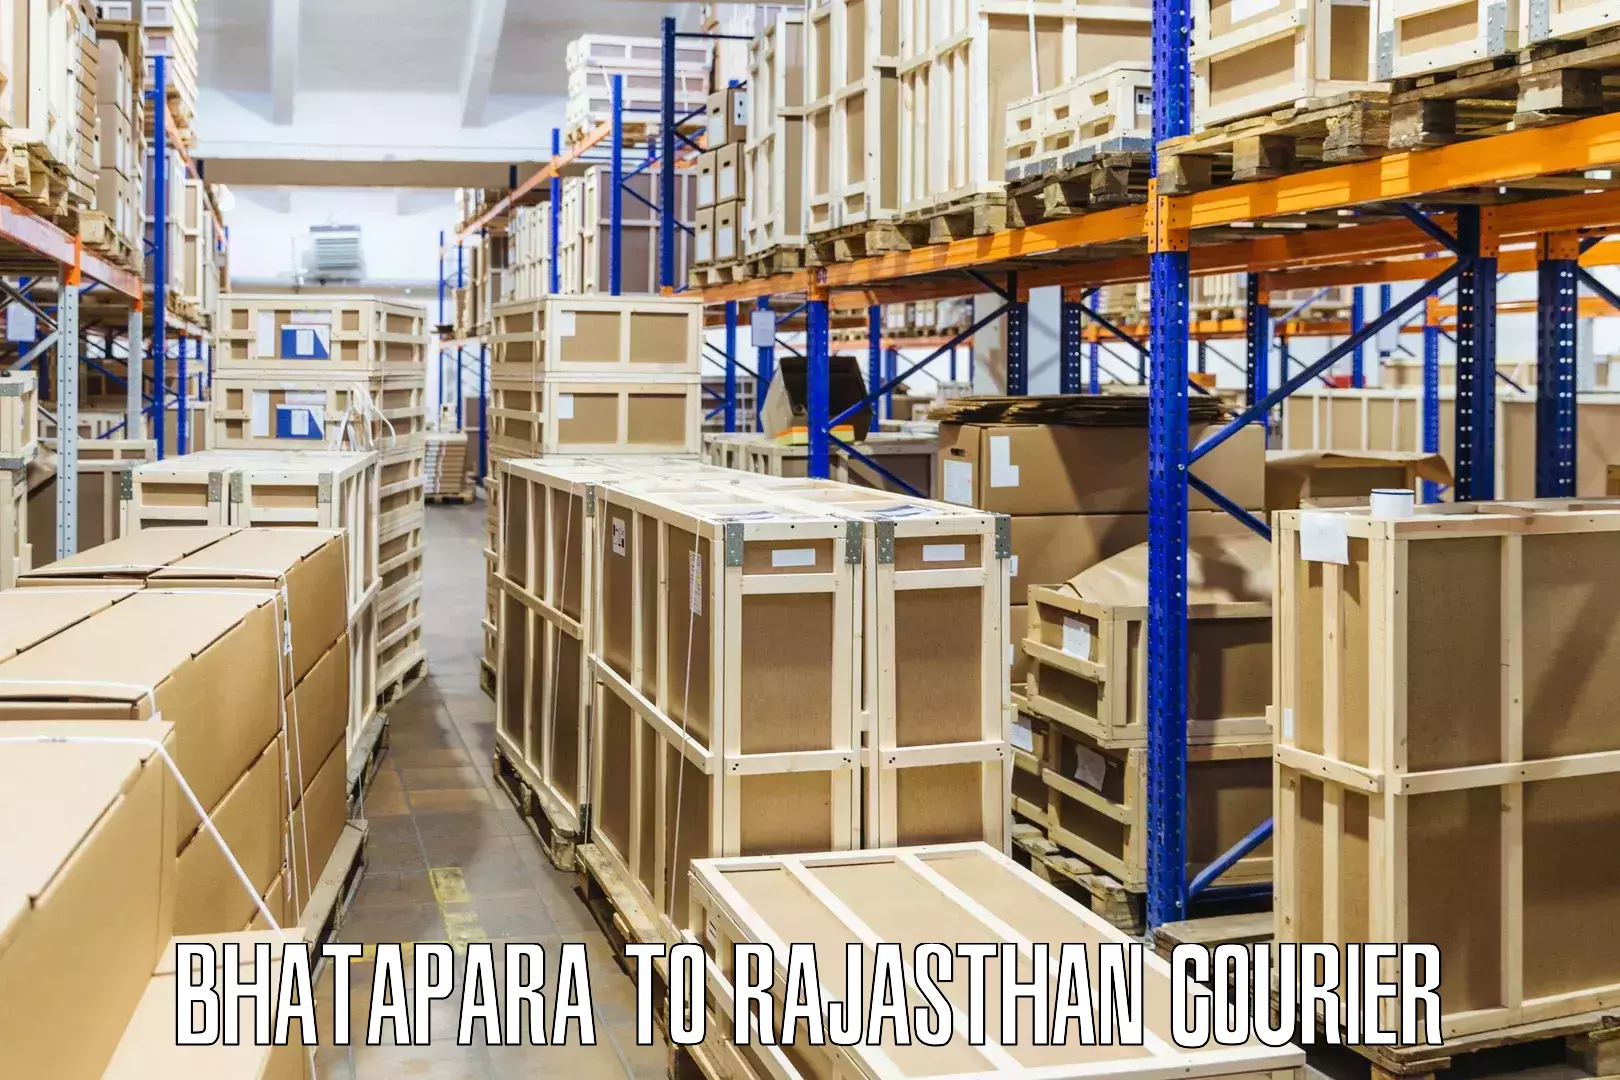 Fast delivery service Bhatapara to Marwar